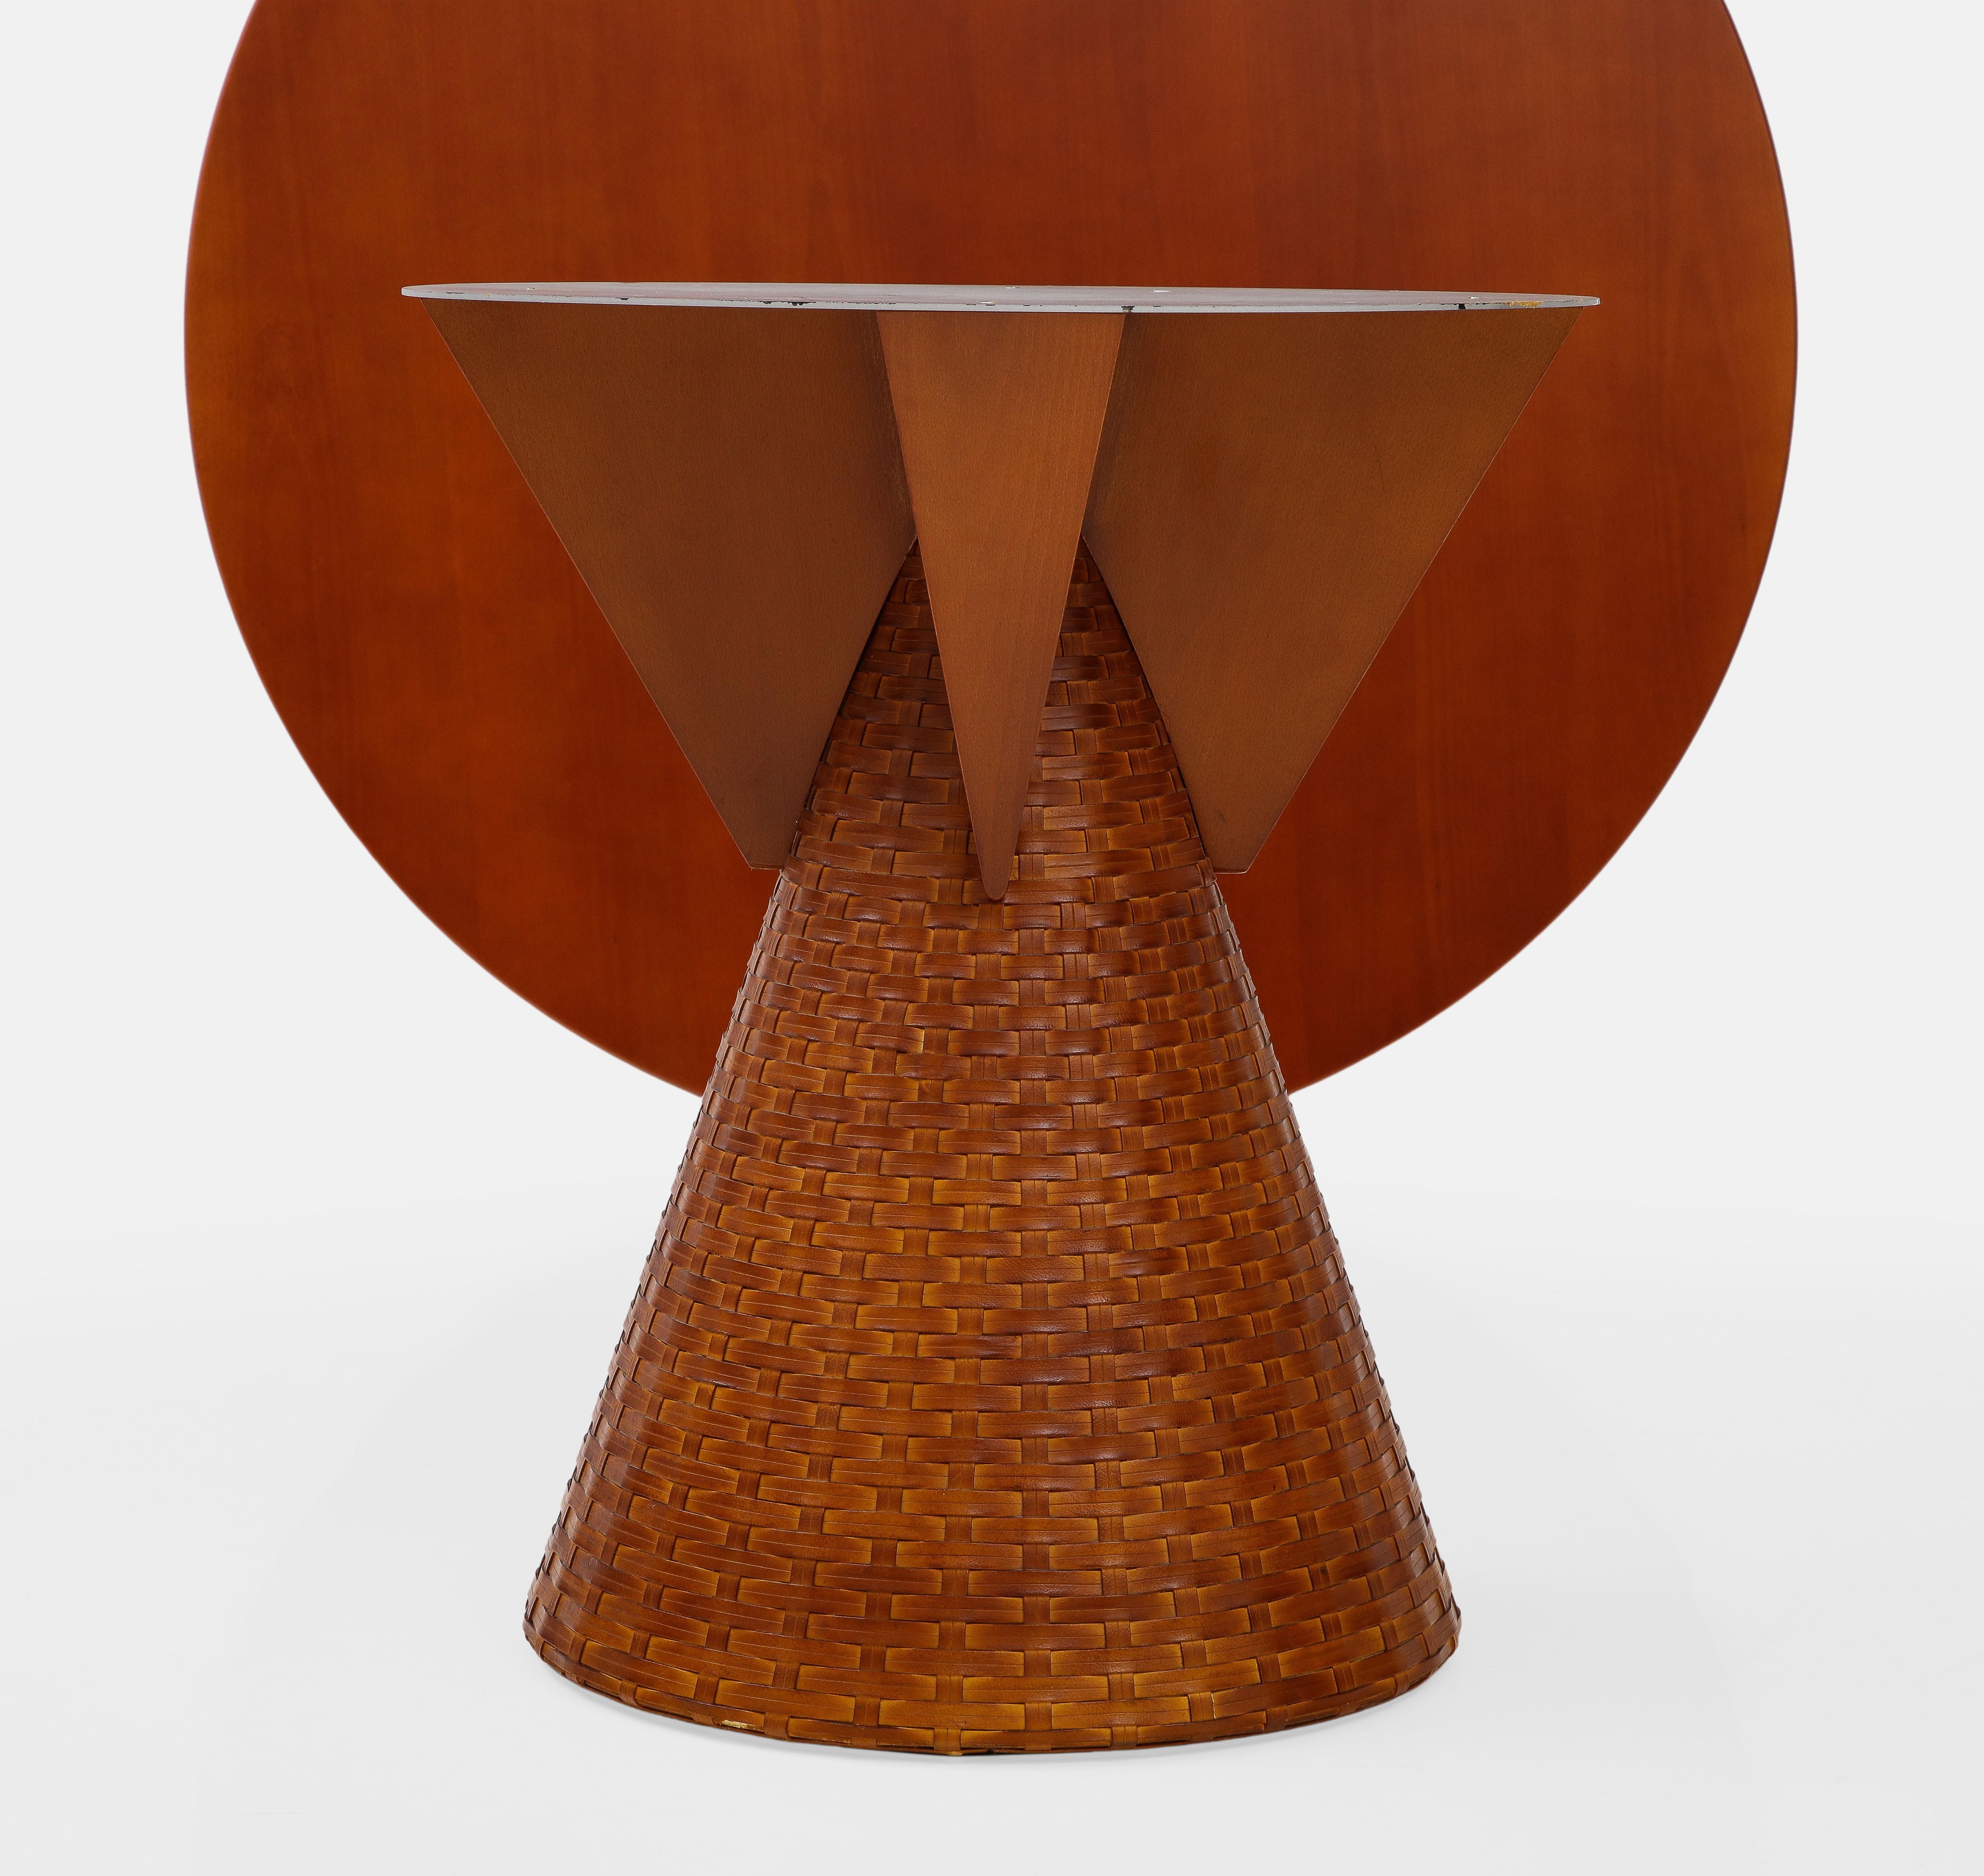 Tito Agnoli for Bonacina Rare Carabou Dining Set in Rattan and Cherry Wood, 1991 For Sale 12